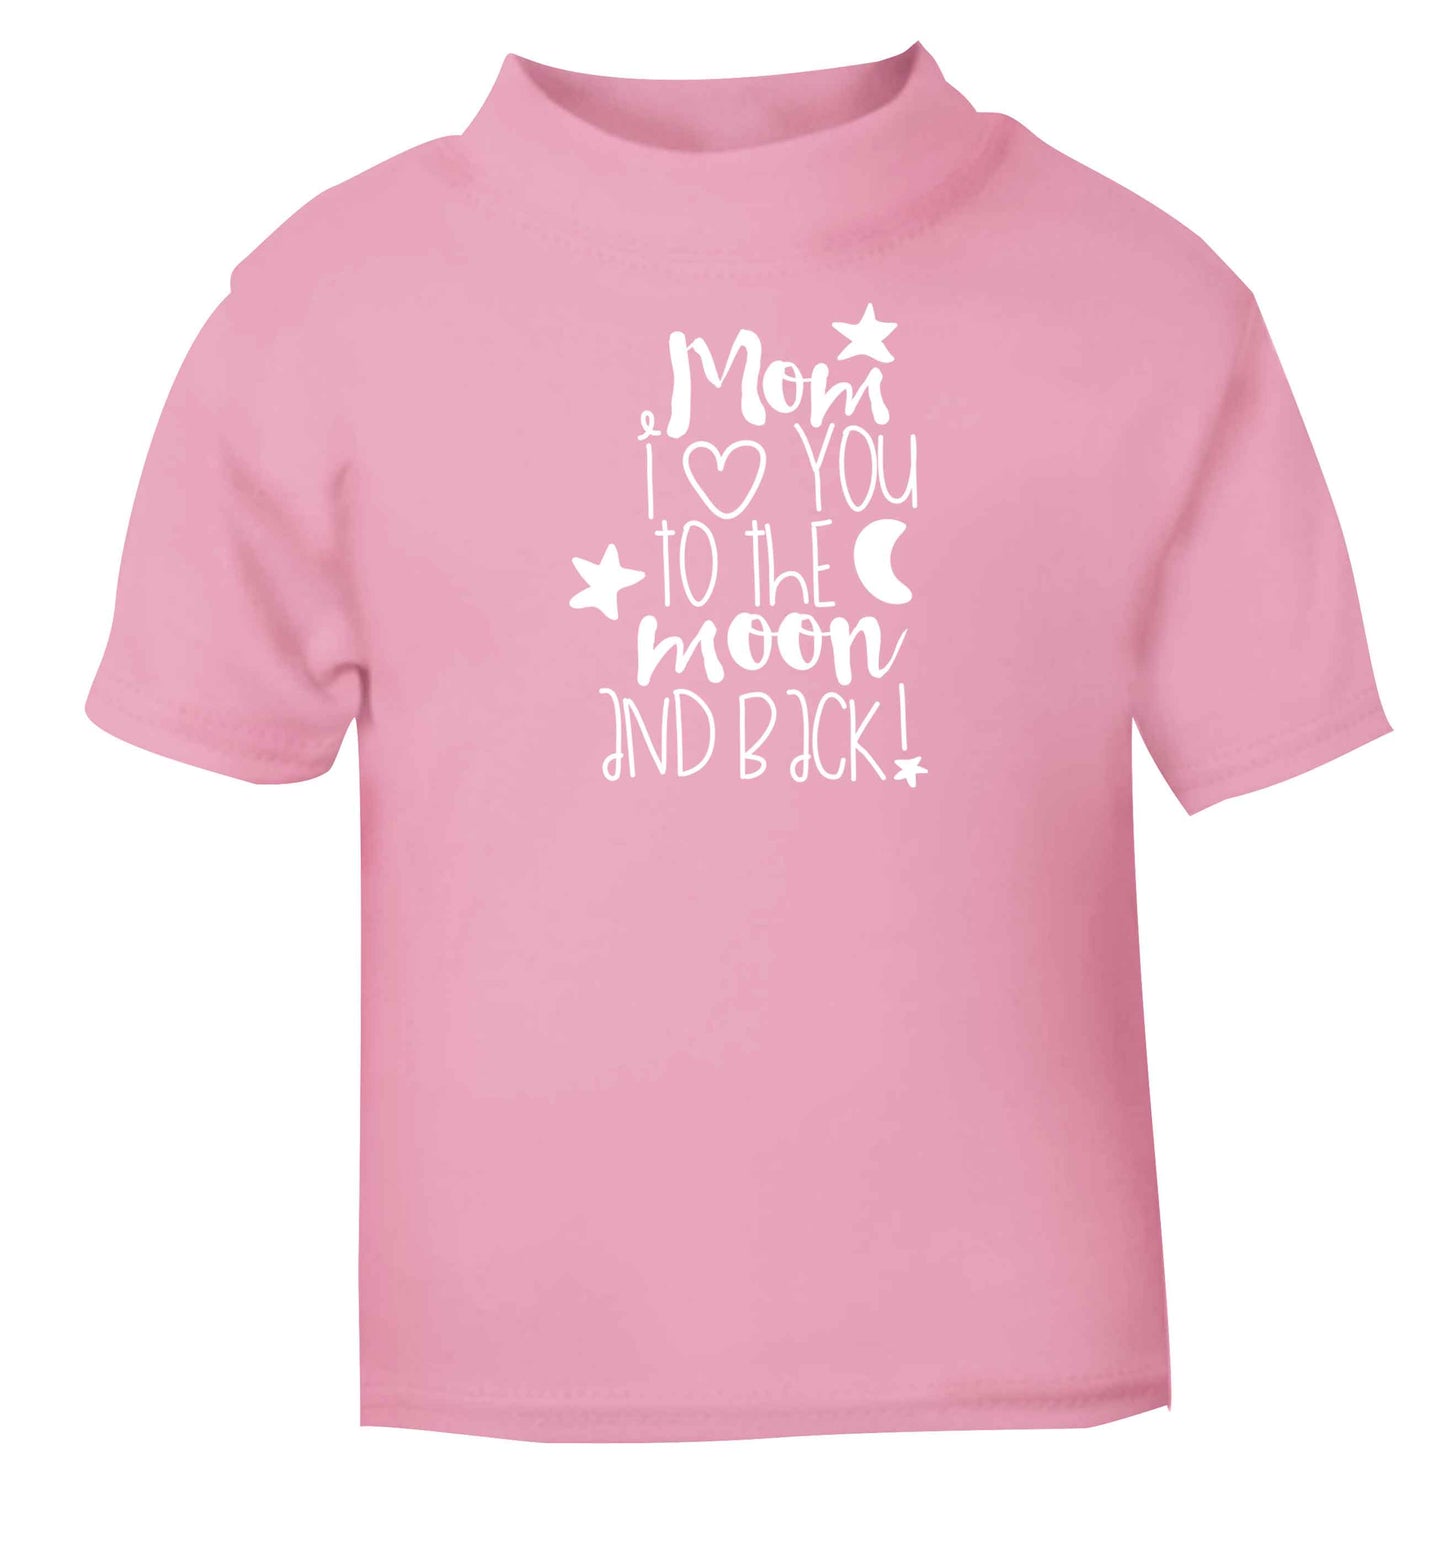 Mom I love you to the moon and back Children's light pink Tshirt 12-13 Years